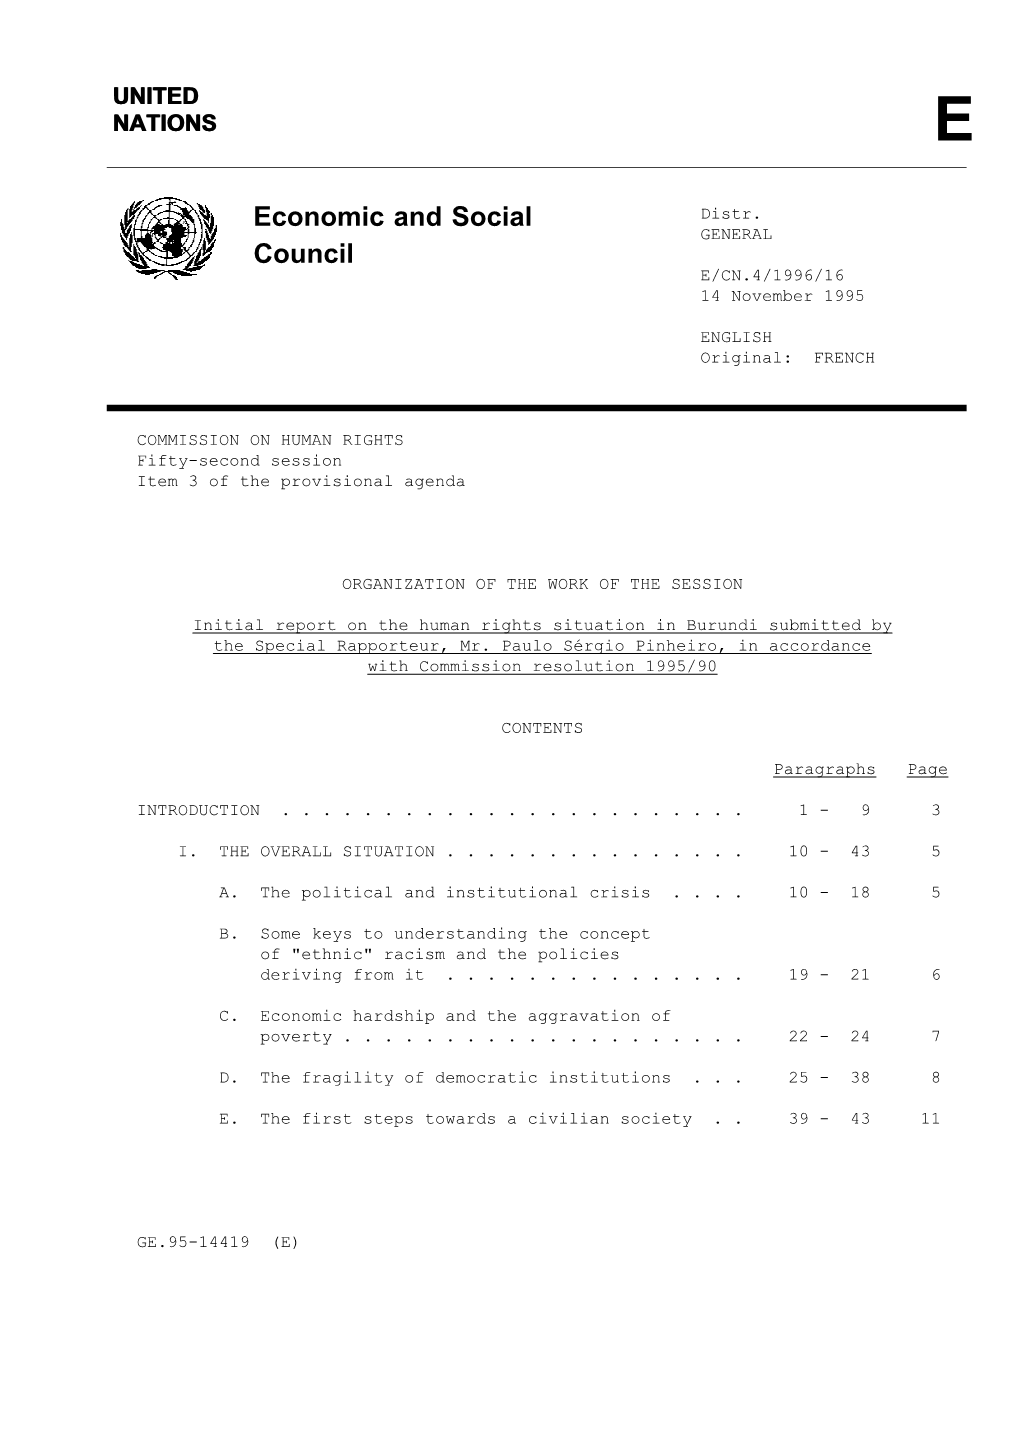 Economic and Social Council in Decision 1995/219, Adopted at Its Resumed Organizational Session for 1995 on 4 May 1995, in New York